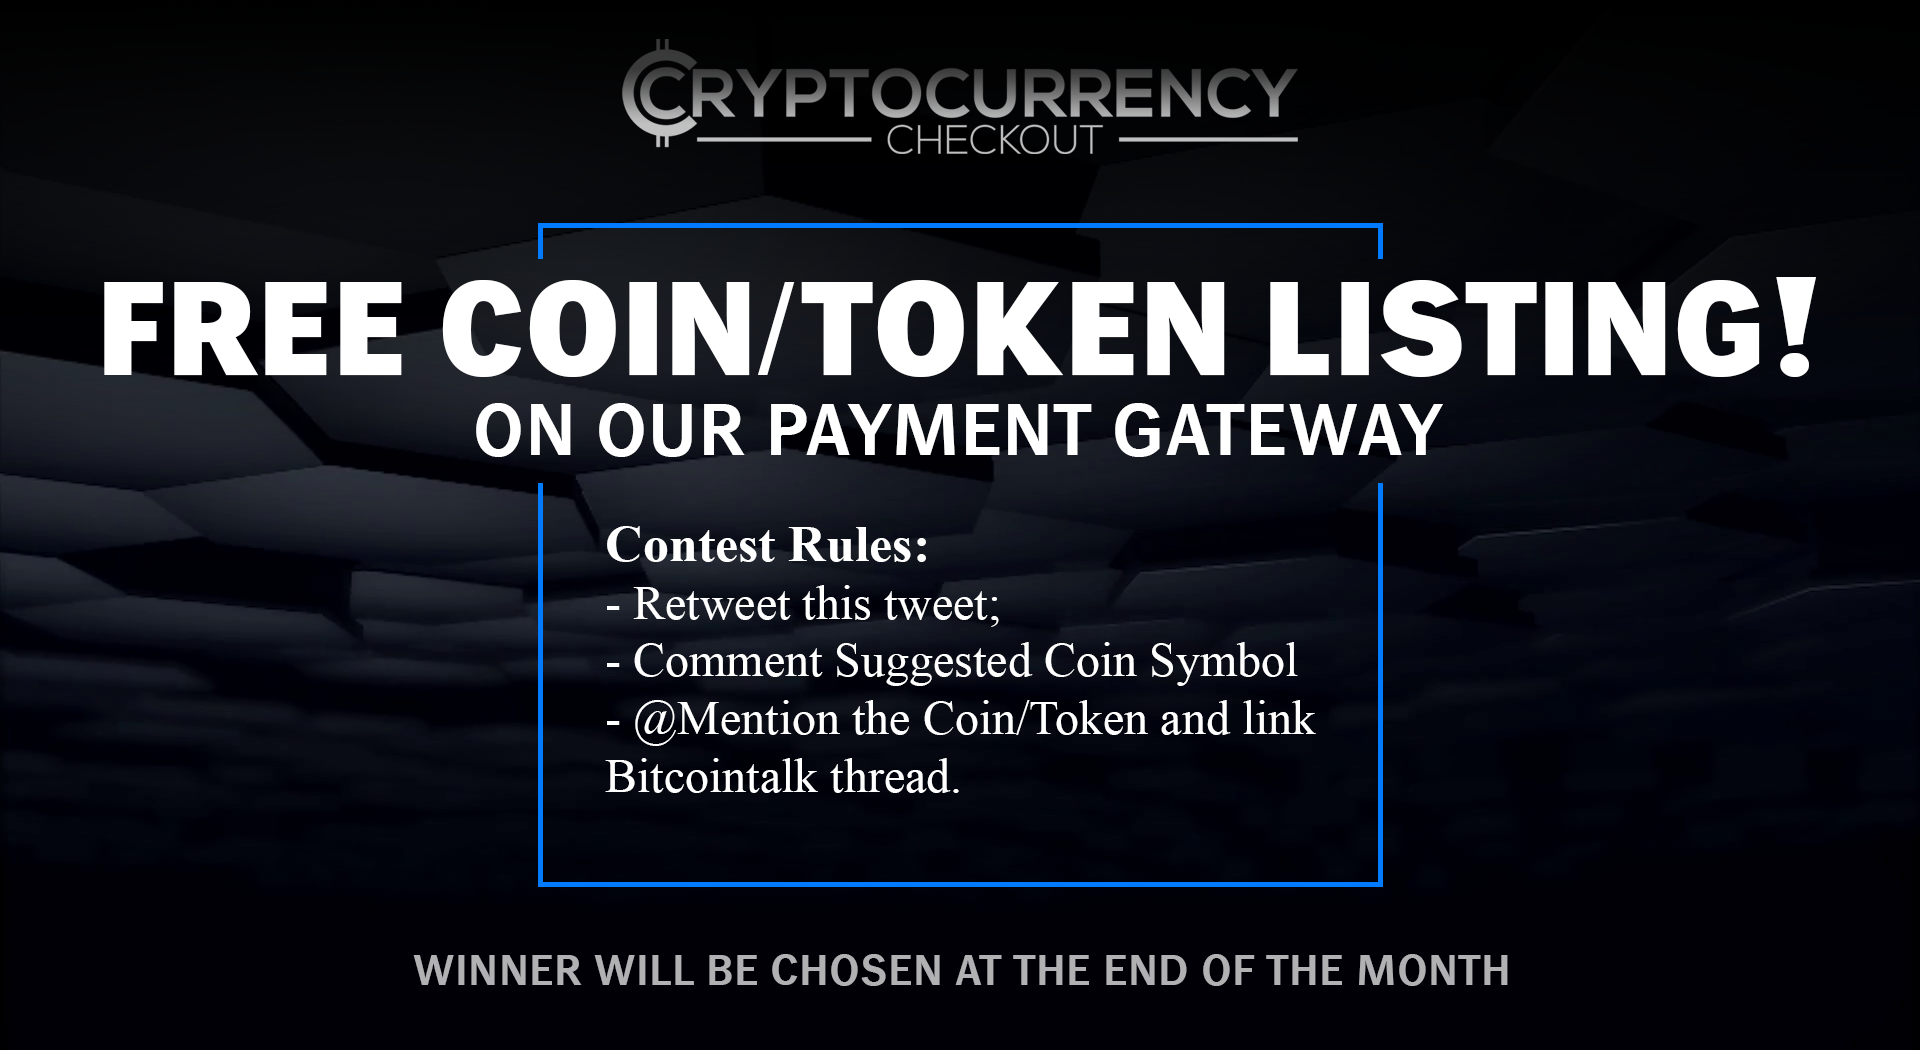 Free Coin / Token Listing on Cryptocurrency Checkout Platform